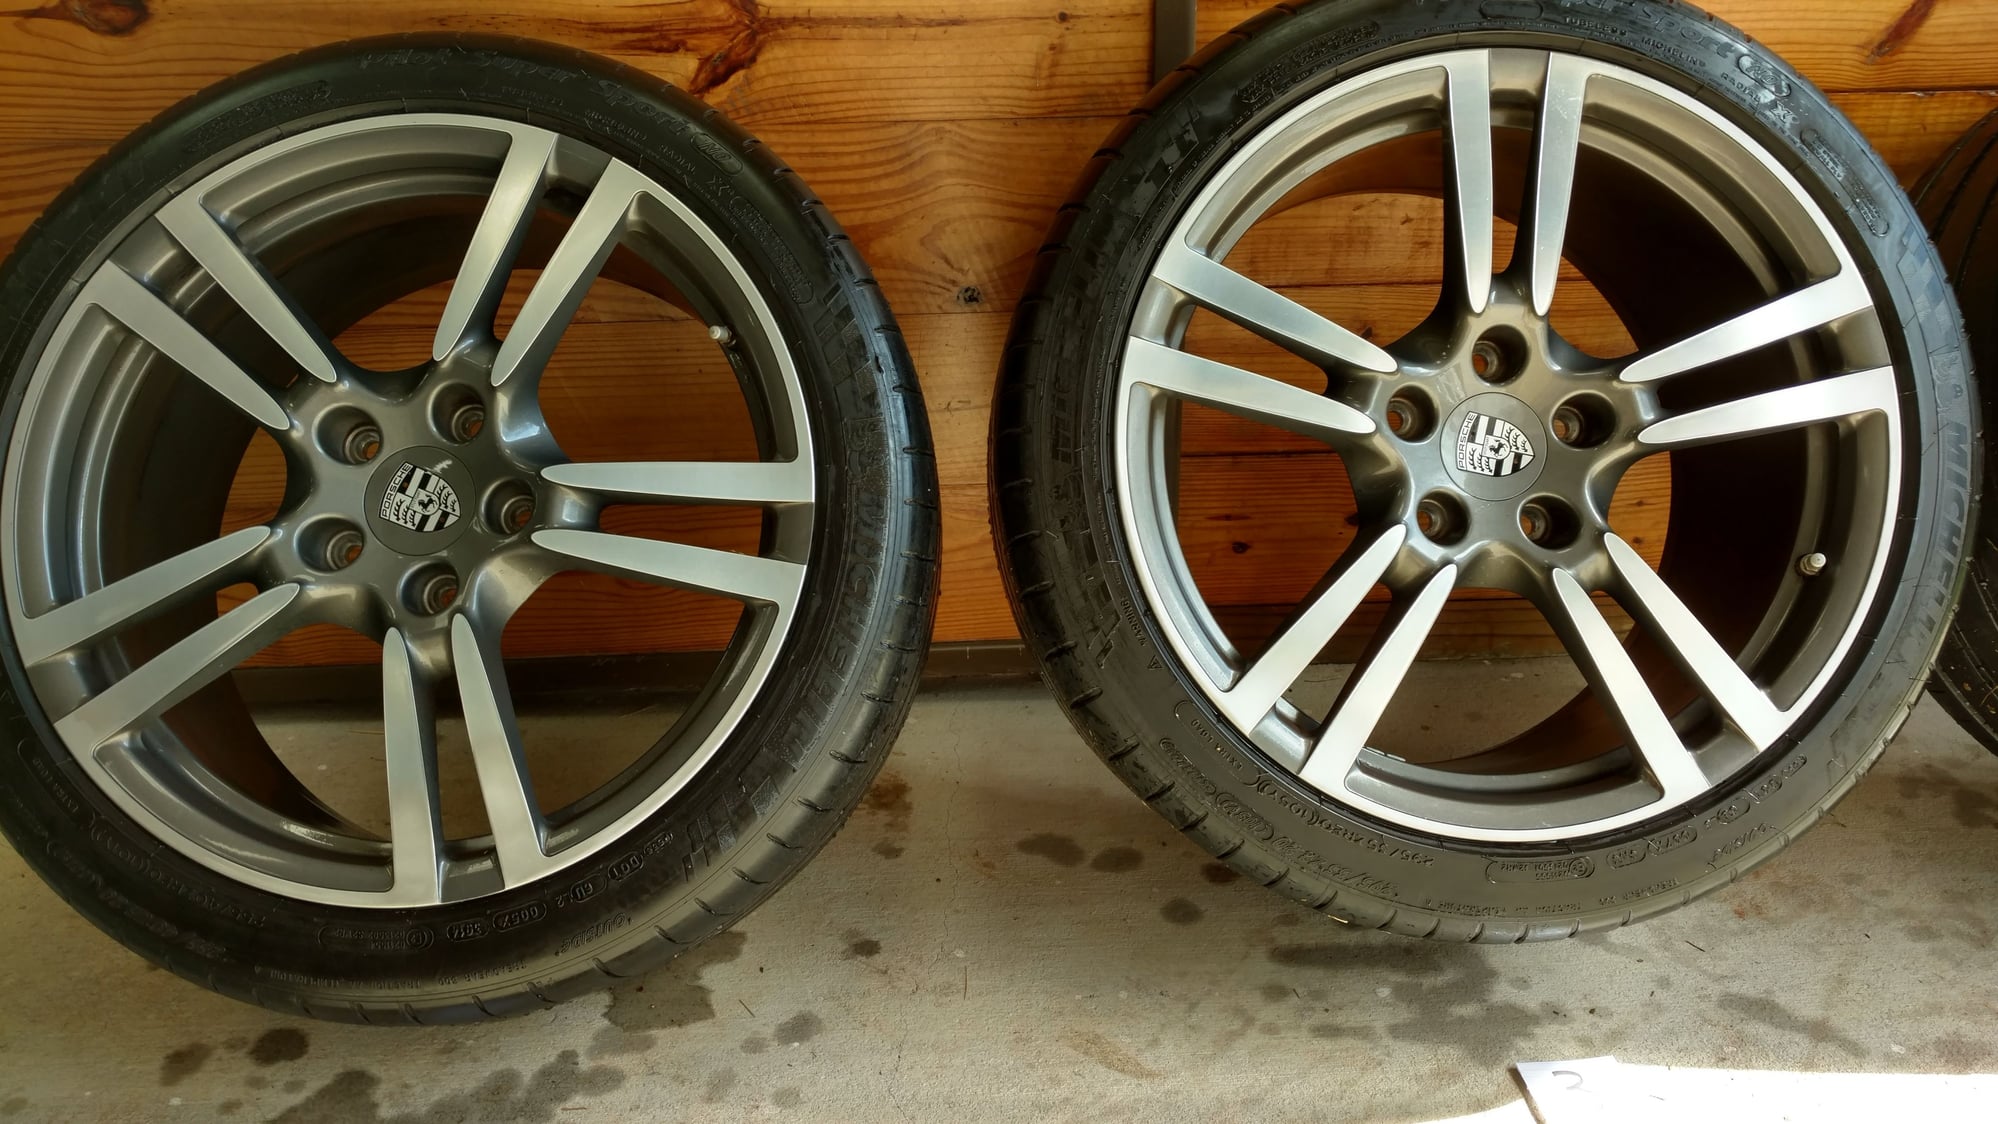 Wheels and Tires/Axles - 20" OEM Porsche Turbo II wheels in exc condition & Michelin Pilot Super Sport tires - Used - 2010 to 2019 Porsche All Models - Greensboro/raleigh, NC 27344, United States